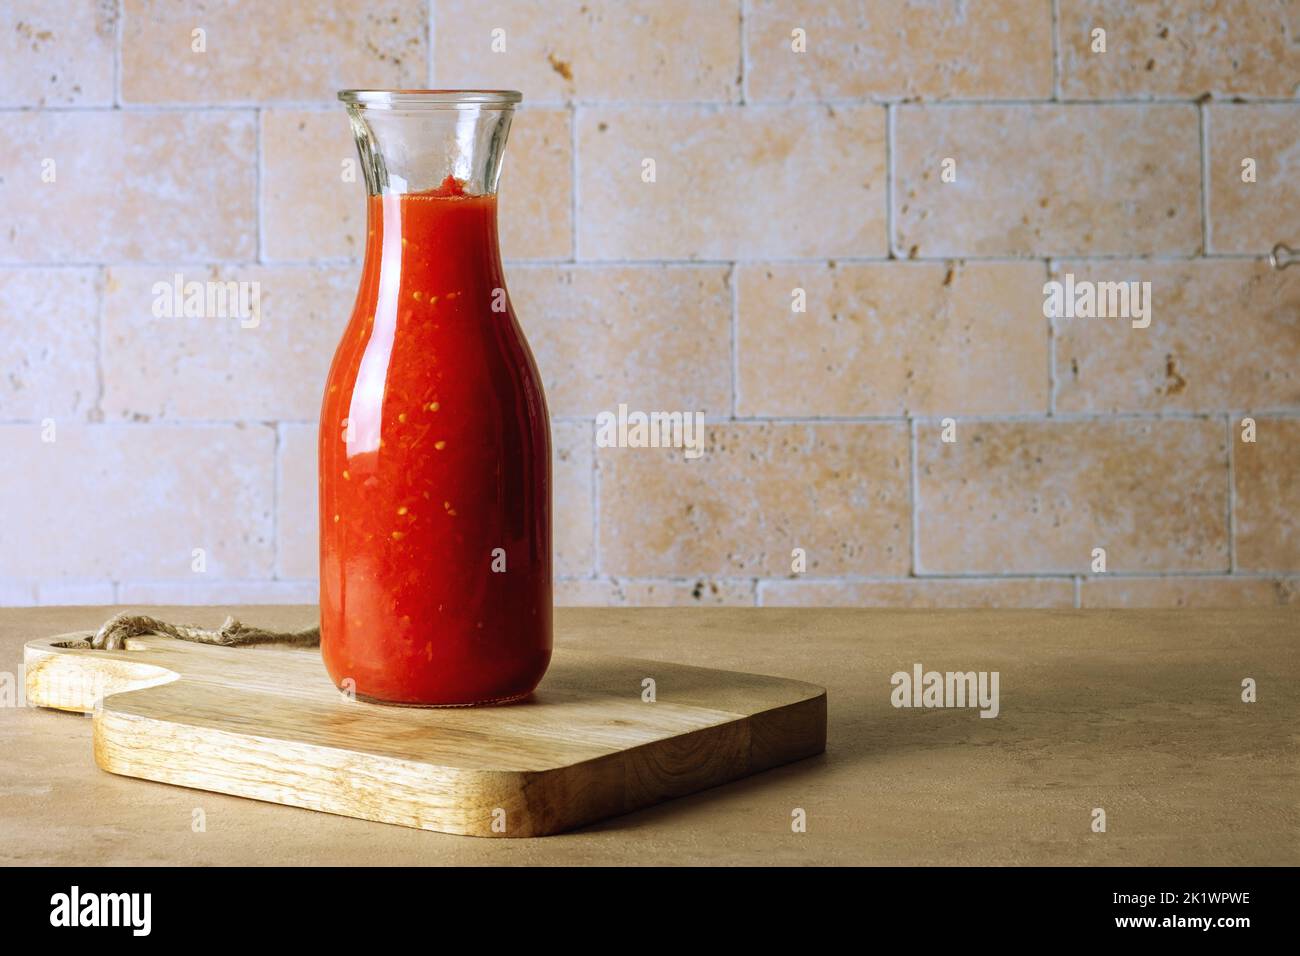 Glass jar bottle with homemade tomato sauce stands on cutting board Stock Photo